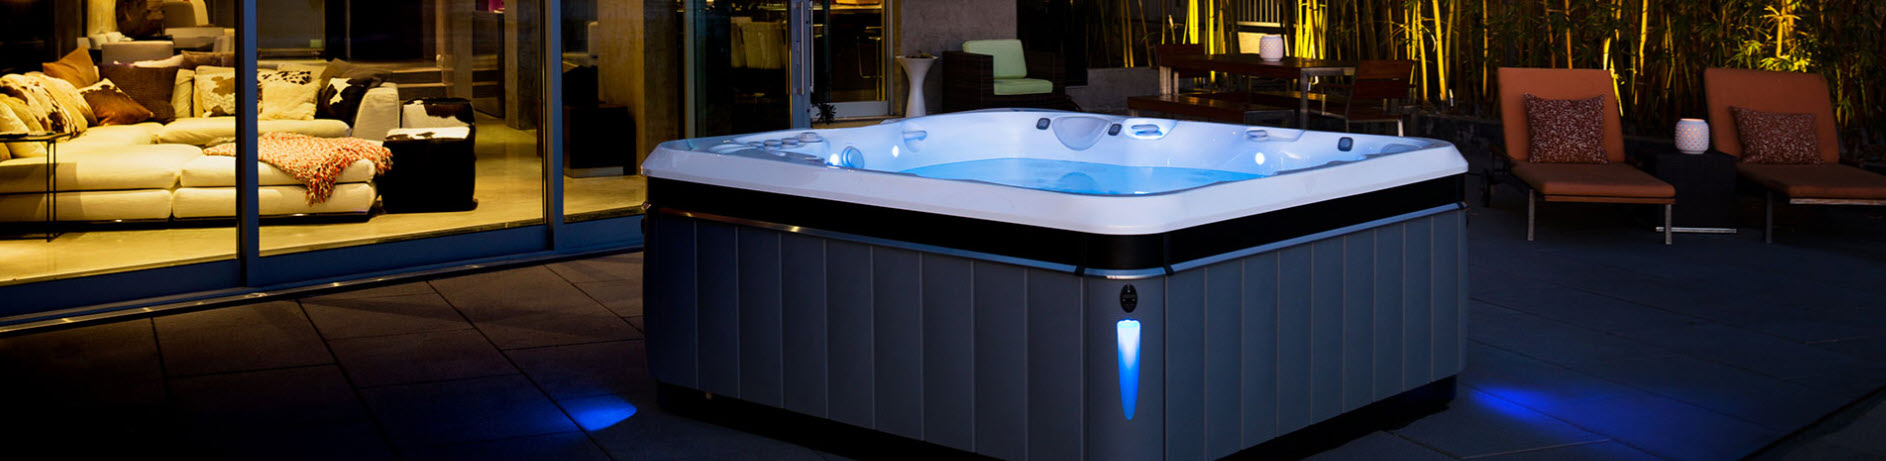 3 Ways a Dip in the Hot Tub Can Rejuvenate You, Used Spas Near Tea SD